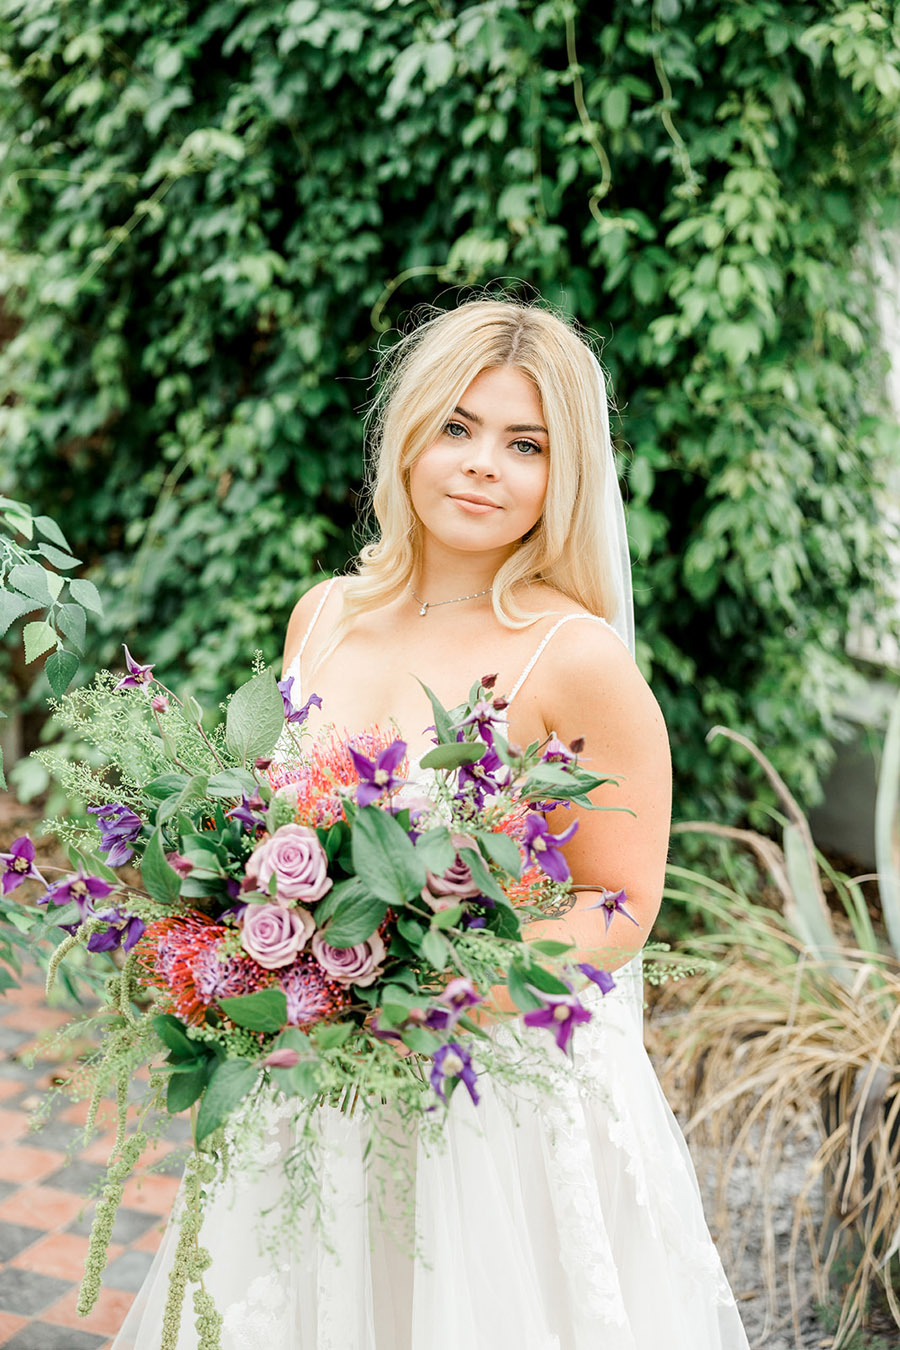 Modern intimate wedding styling inspiration from Slindon House, image credit Kelsie Scully (4)